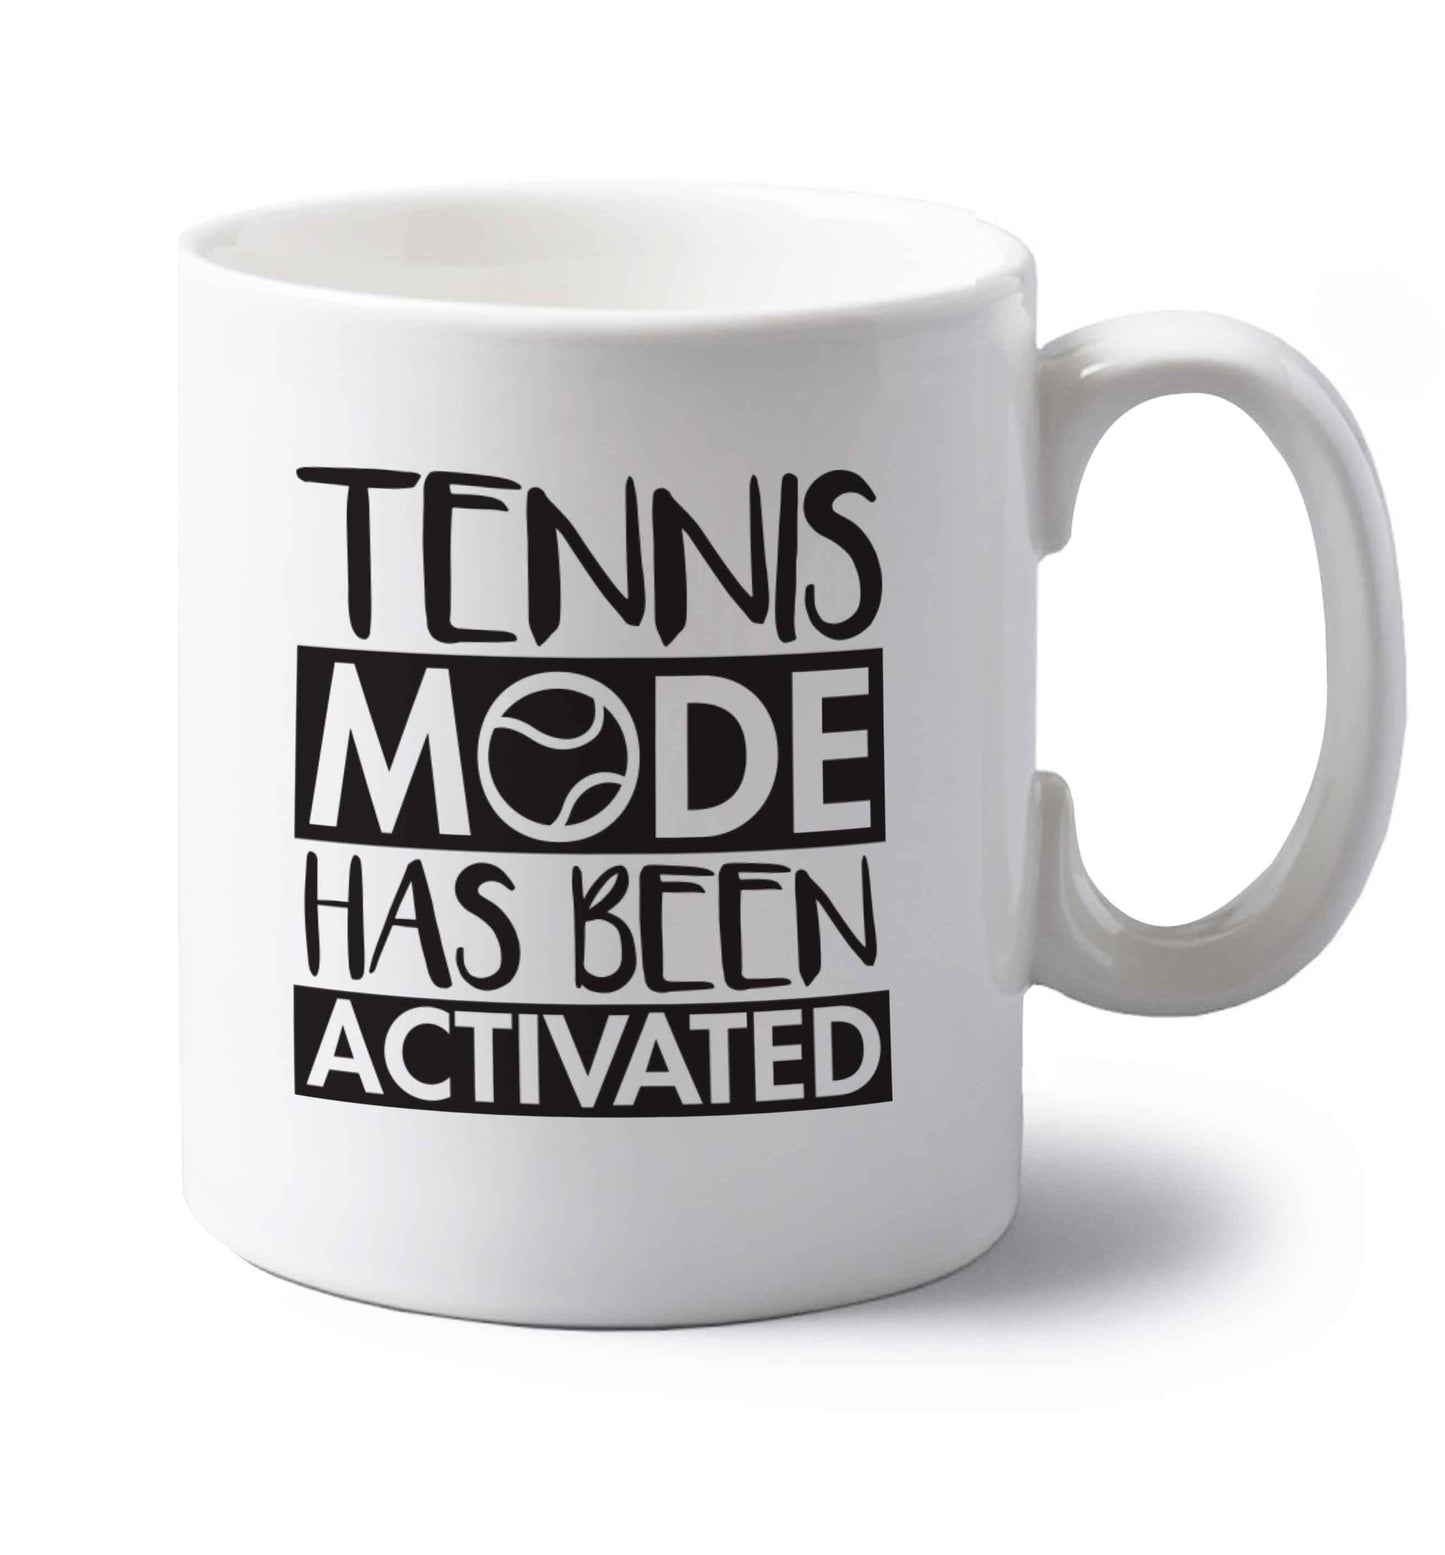 Tennis mode has been activated left handed white ceramic mug 